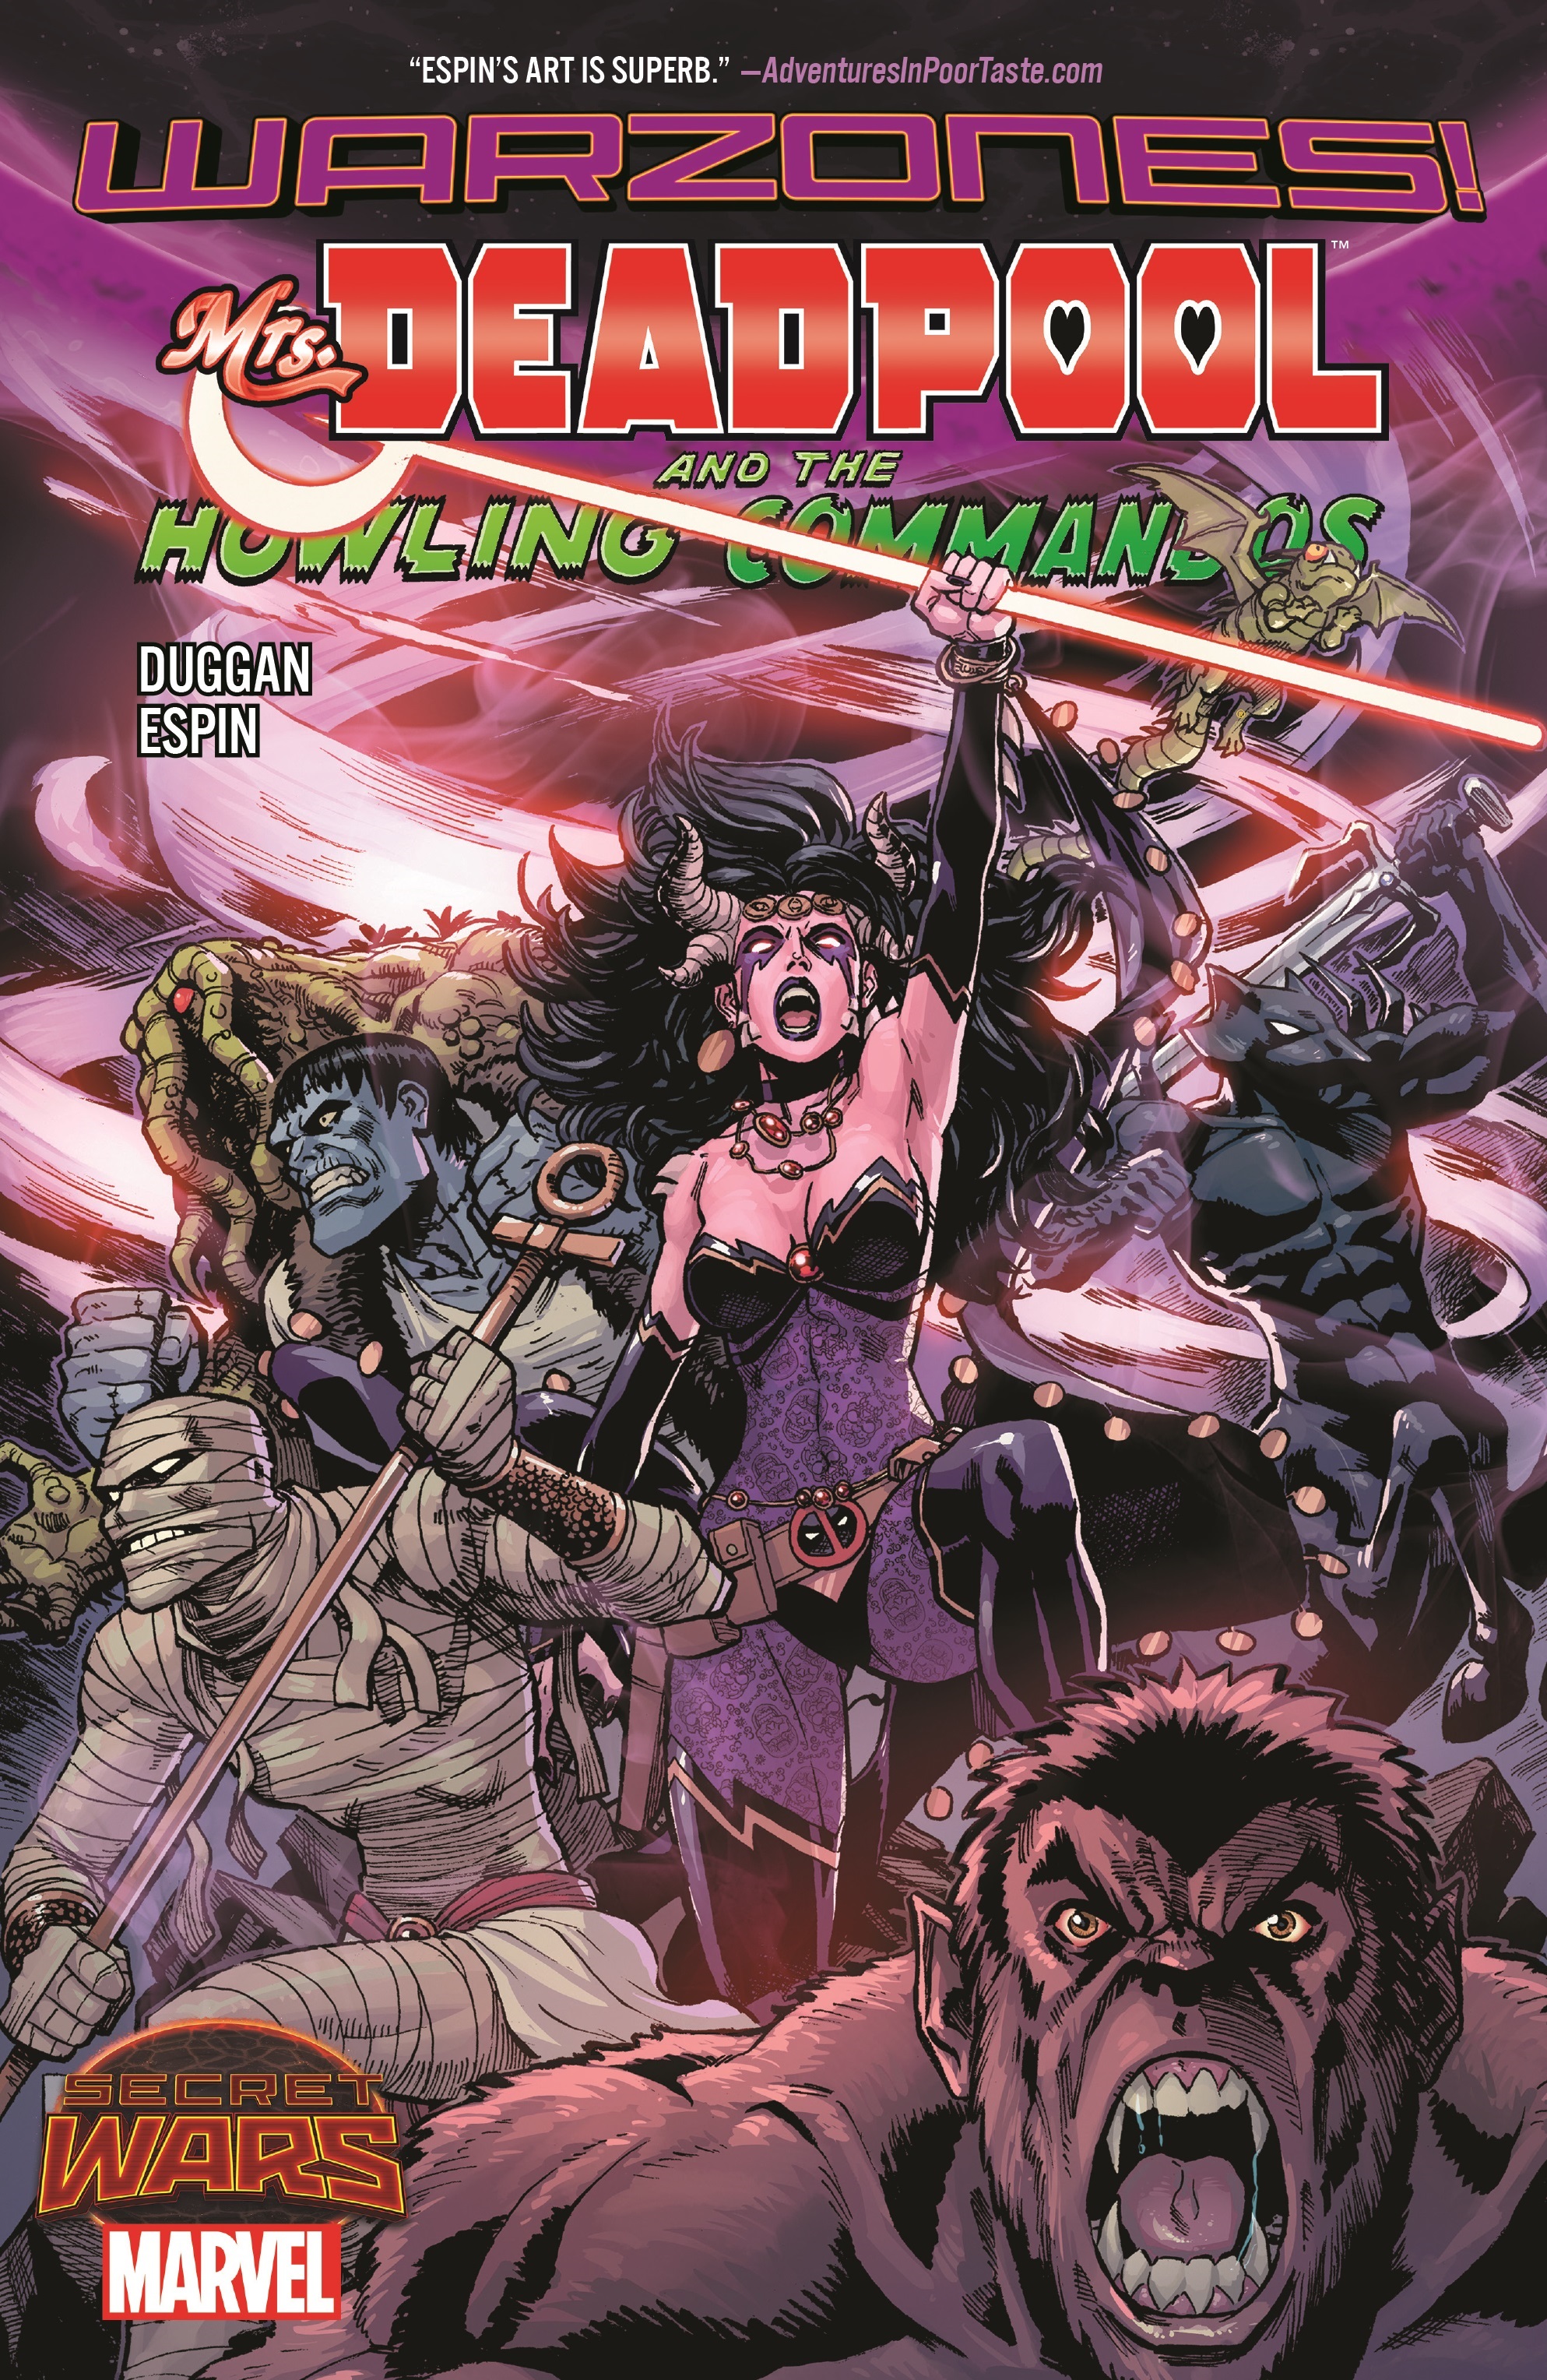 Mrs. Deadpool and the Howling Commandos (Trade Paperback)